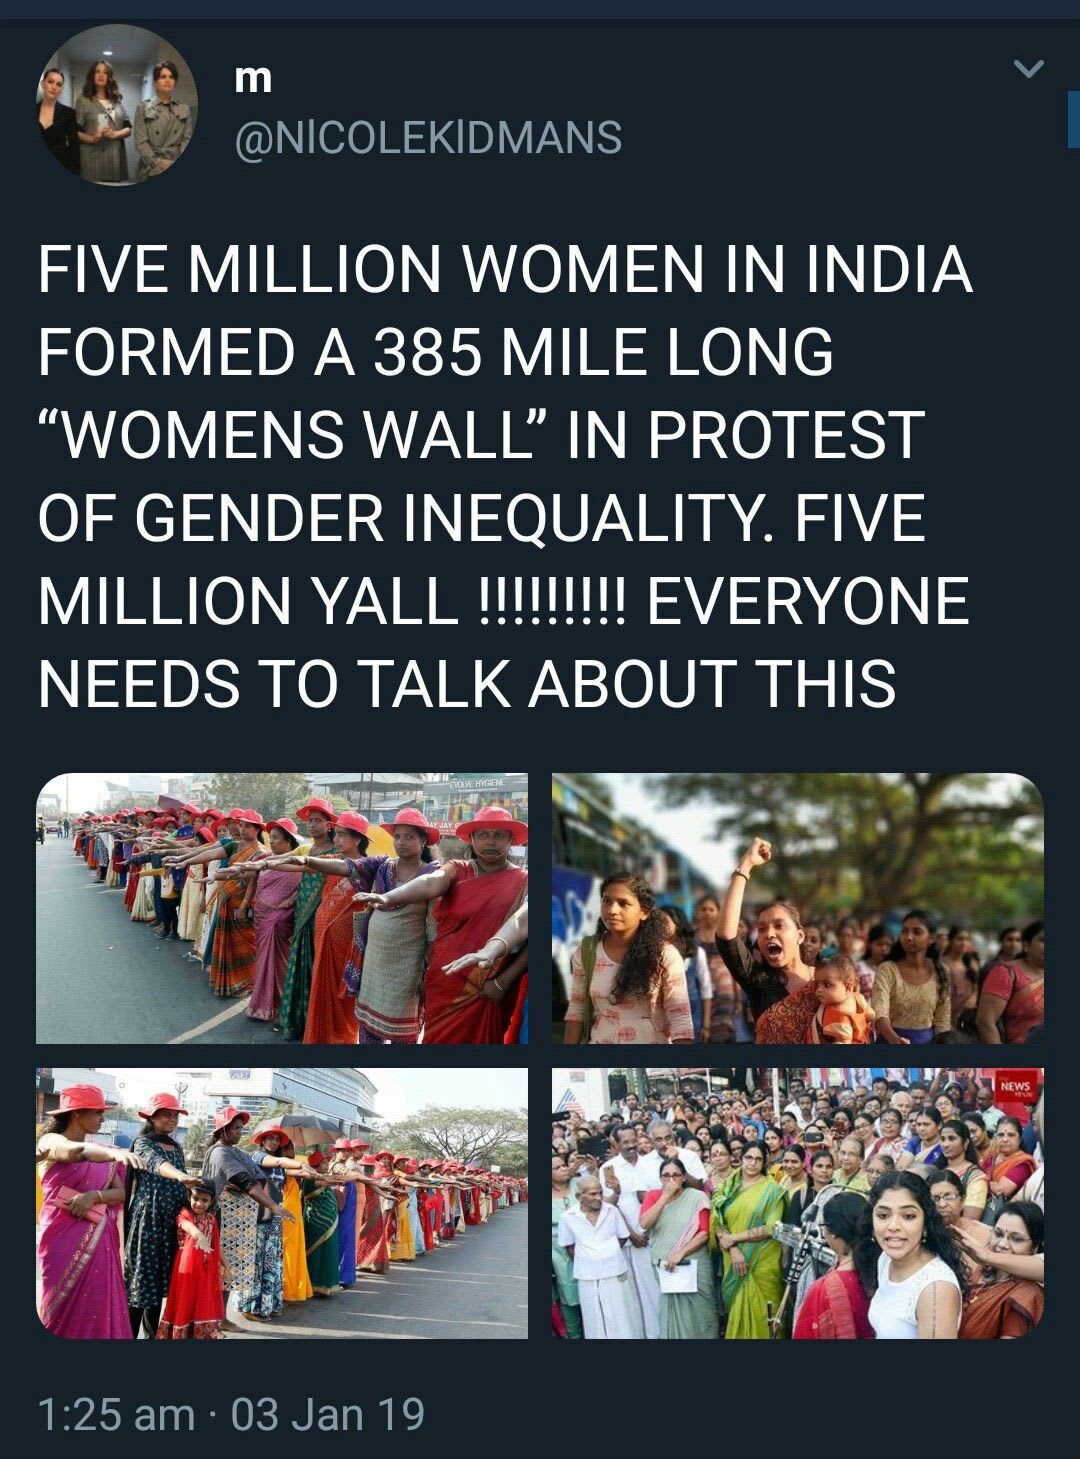 On New Year's day, 3.5 - 5 million women created a 385 mile long "wall" that stretched from one end of the state to the other.… | Faith in humanity, Feminism, Women